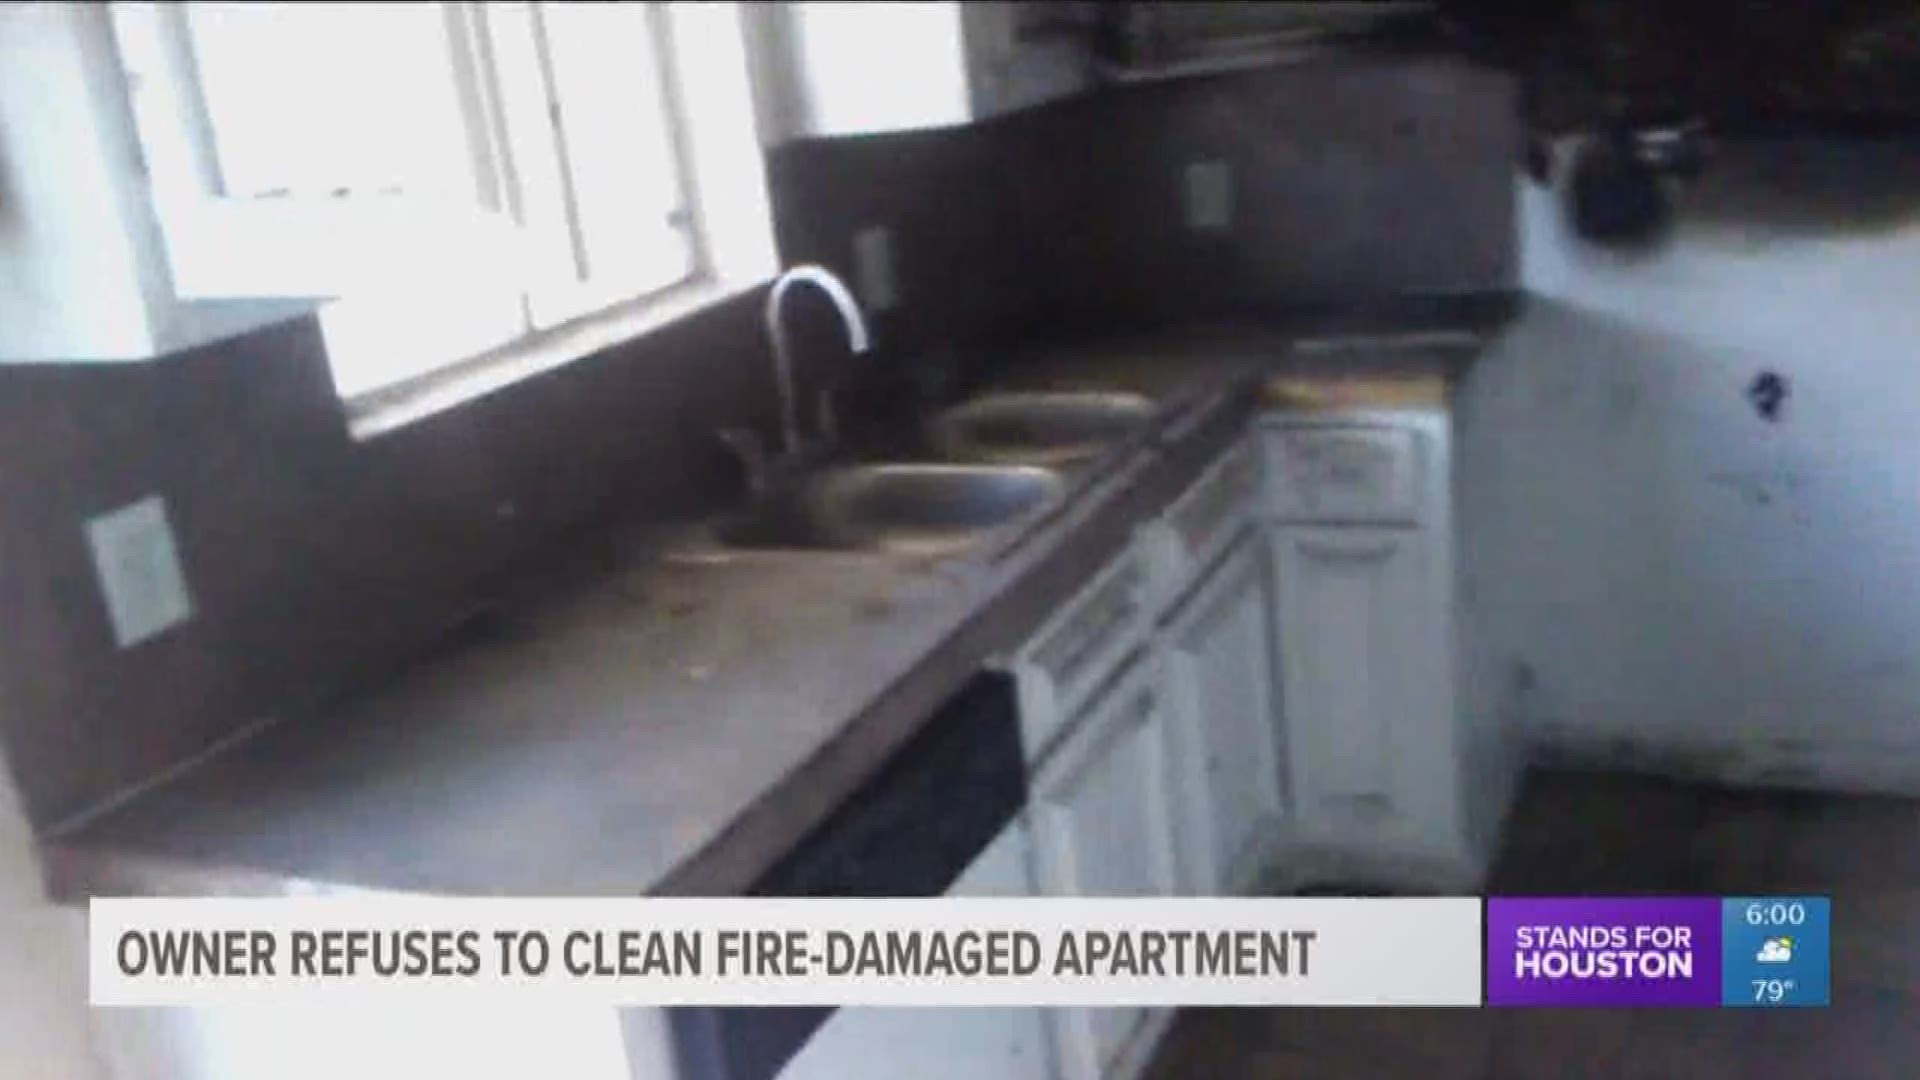 Residents of a north Harris County apartment complex say they're having to live in deplorable conditions after the unit above them caught fire last week.